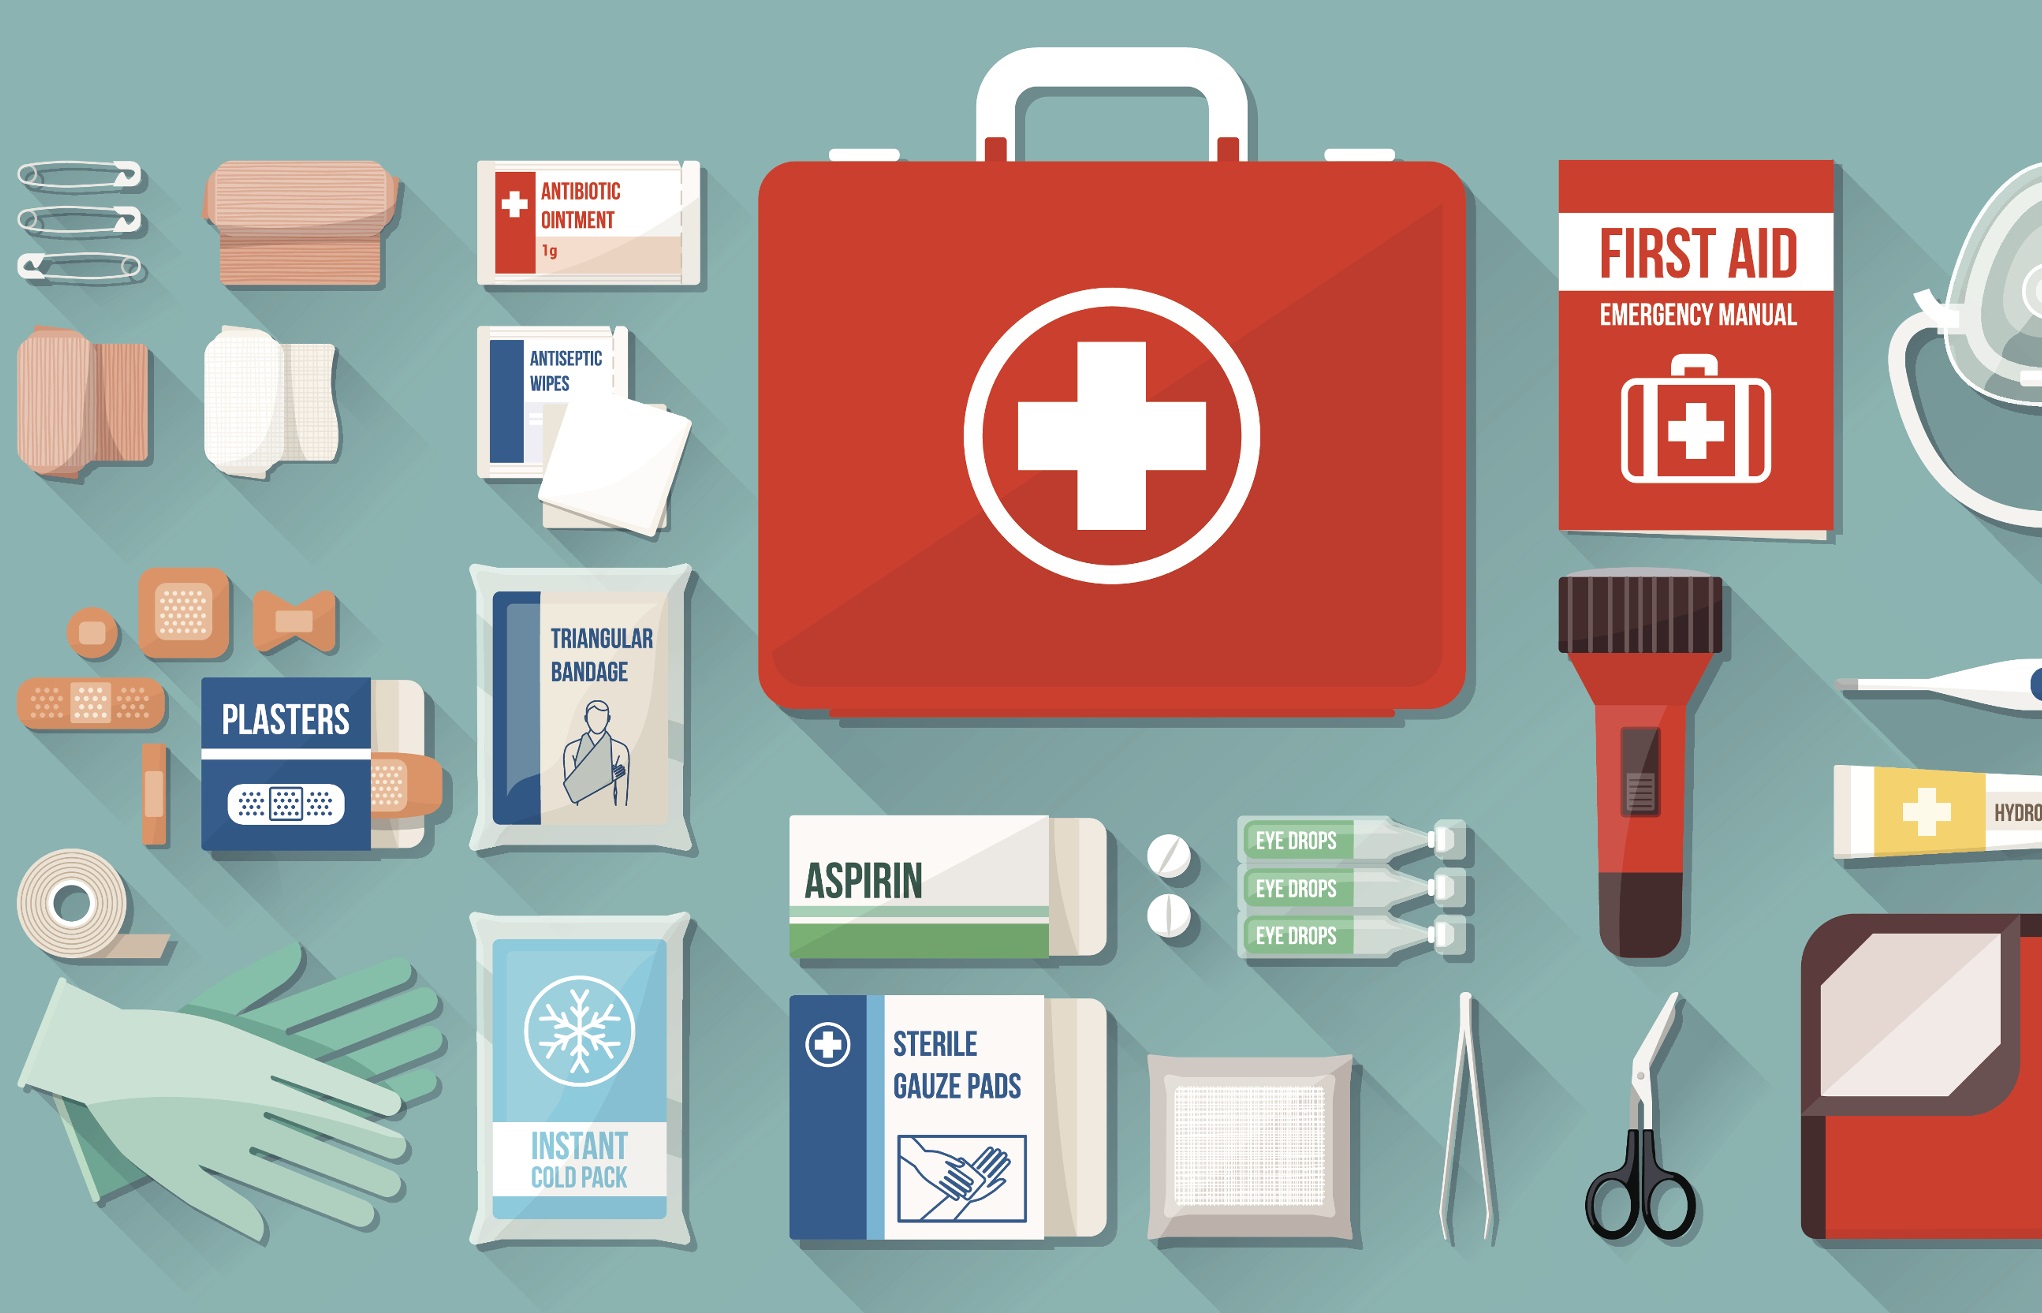 basic medicines for first aid kit